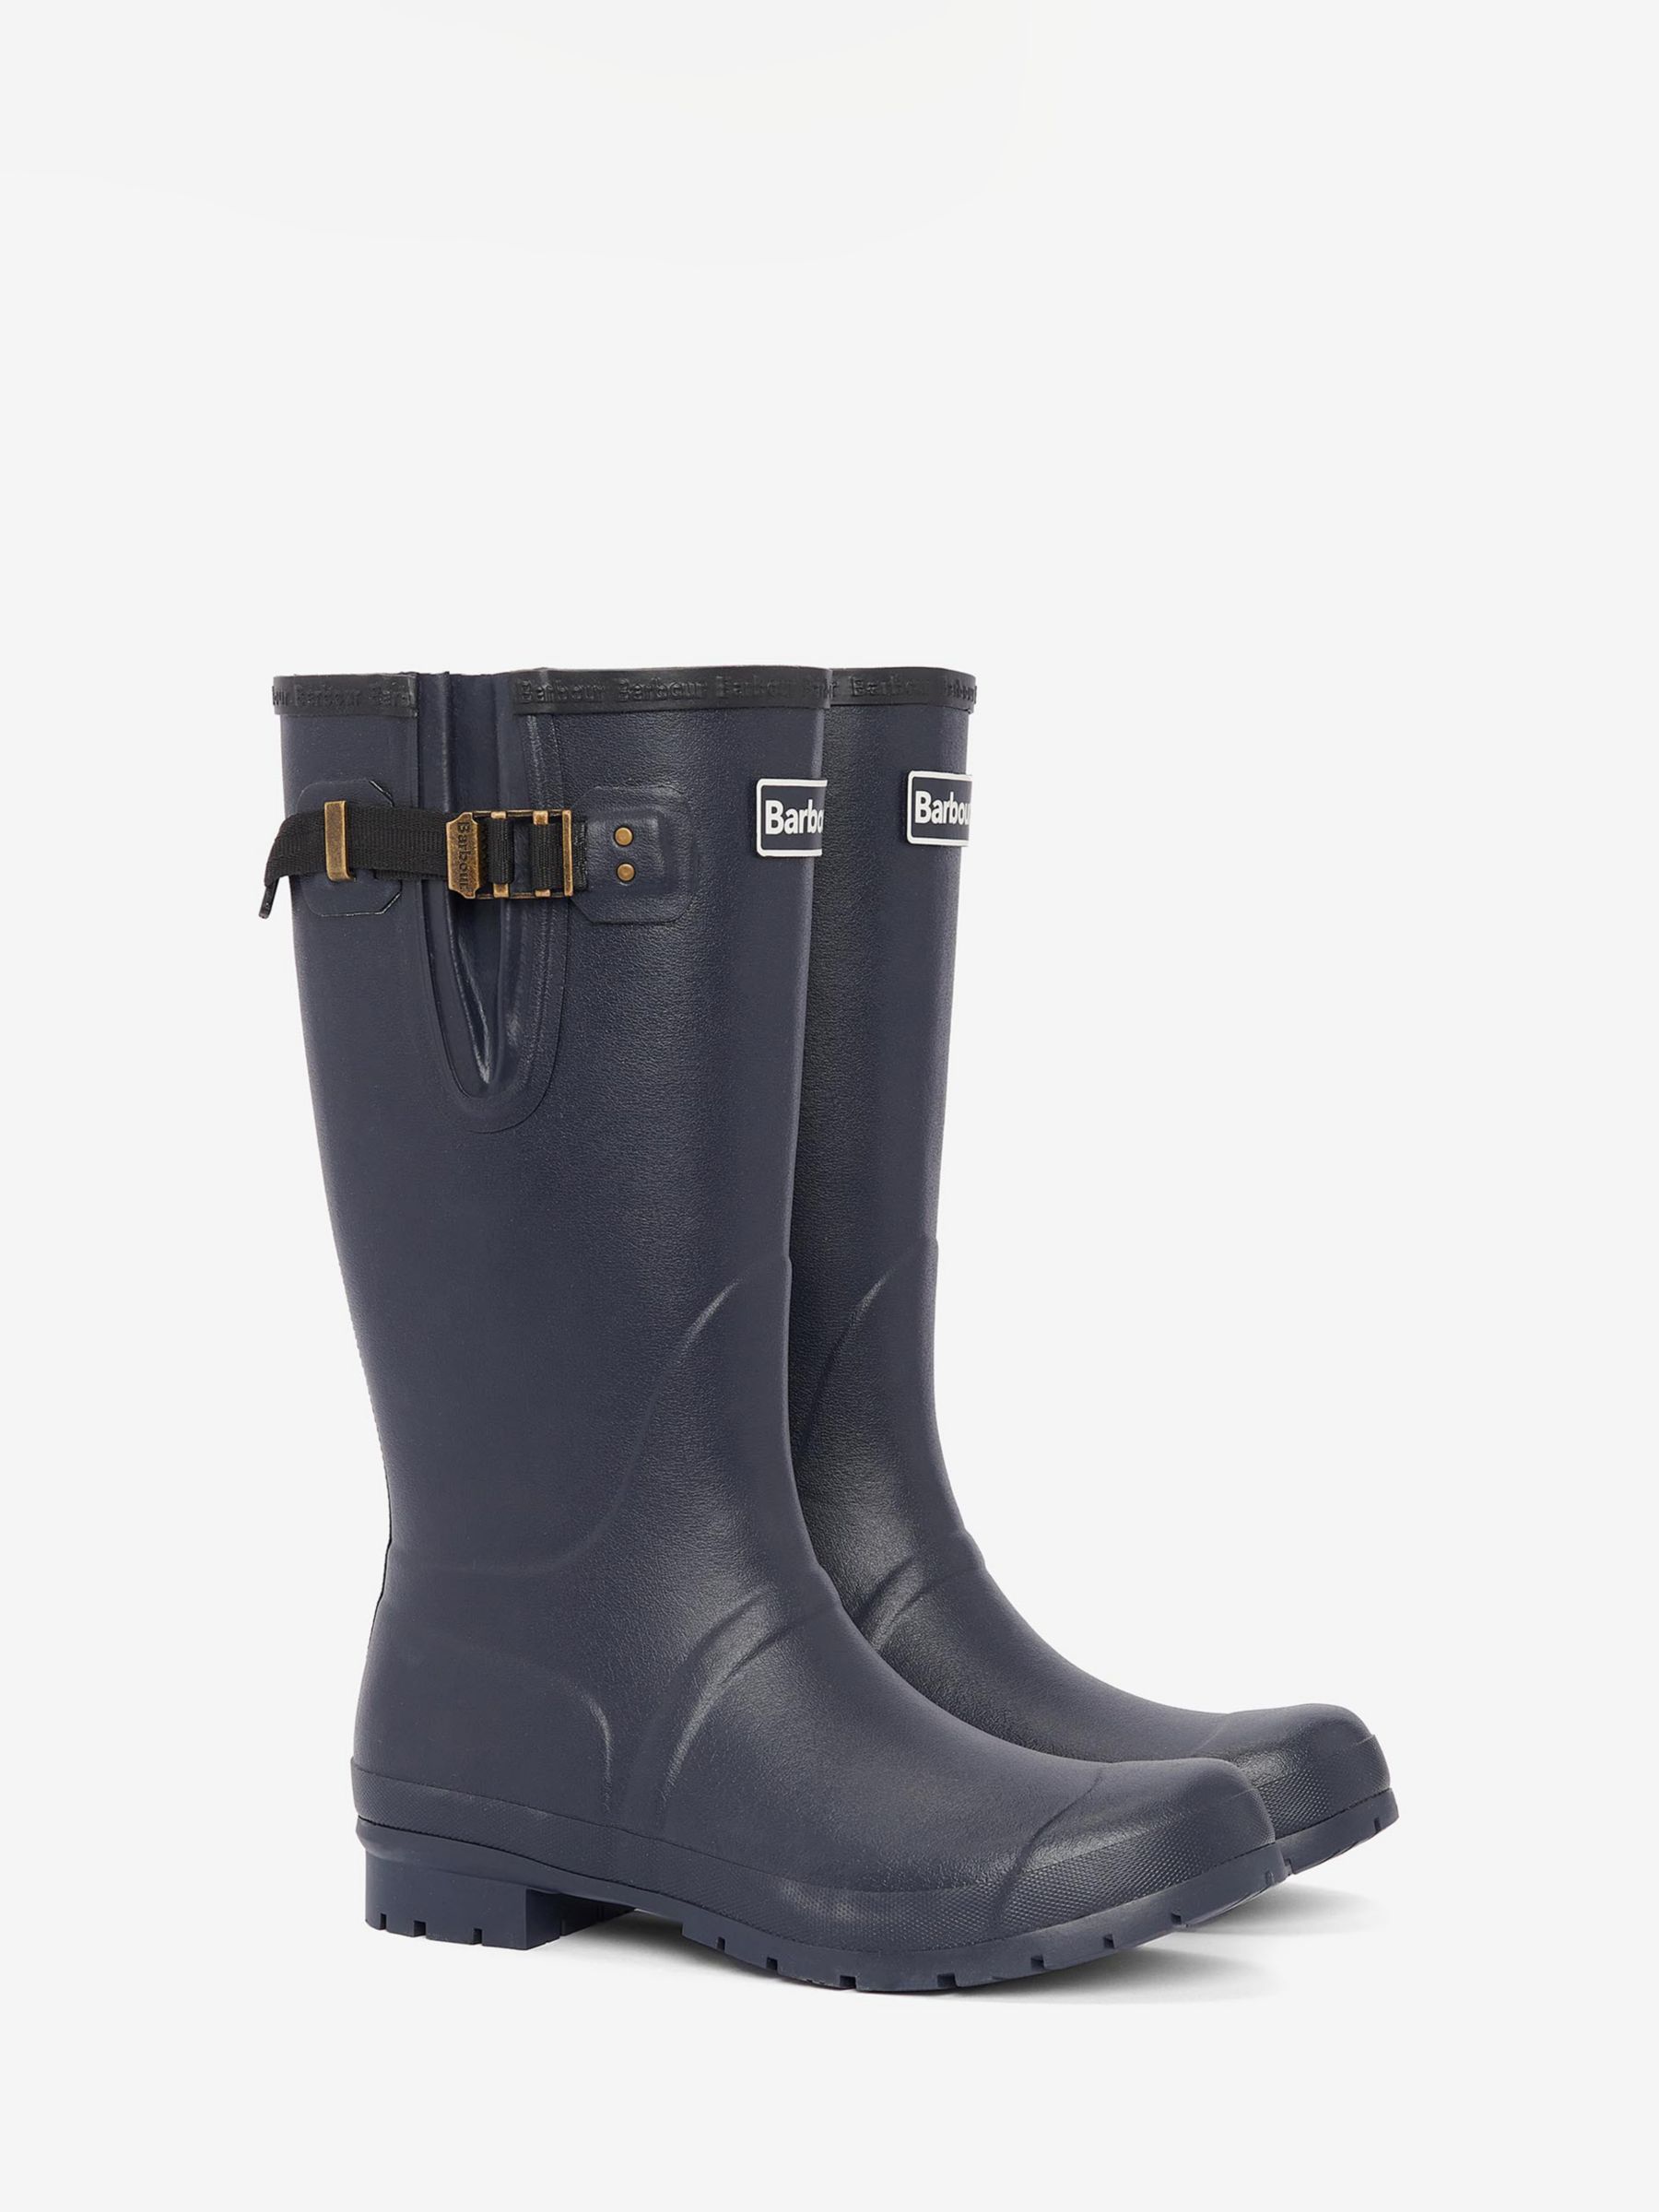 Barbour Cloud Tall Wellington Boots, Navy